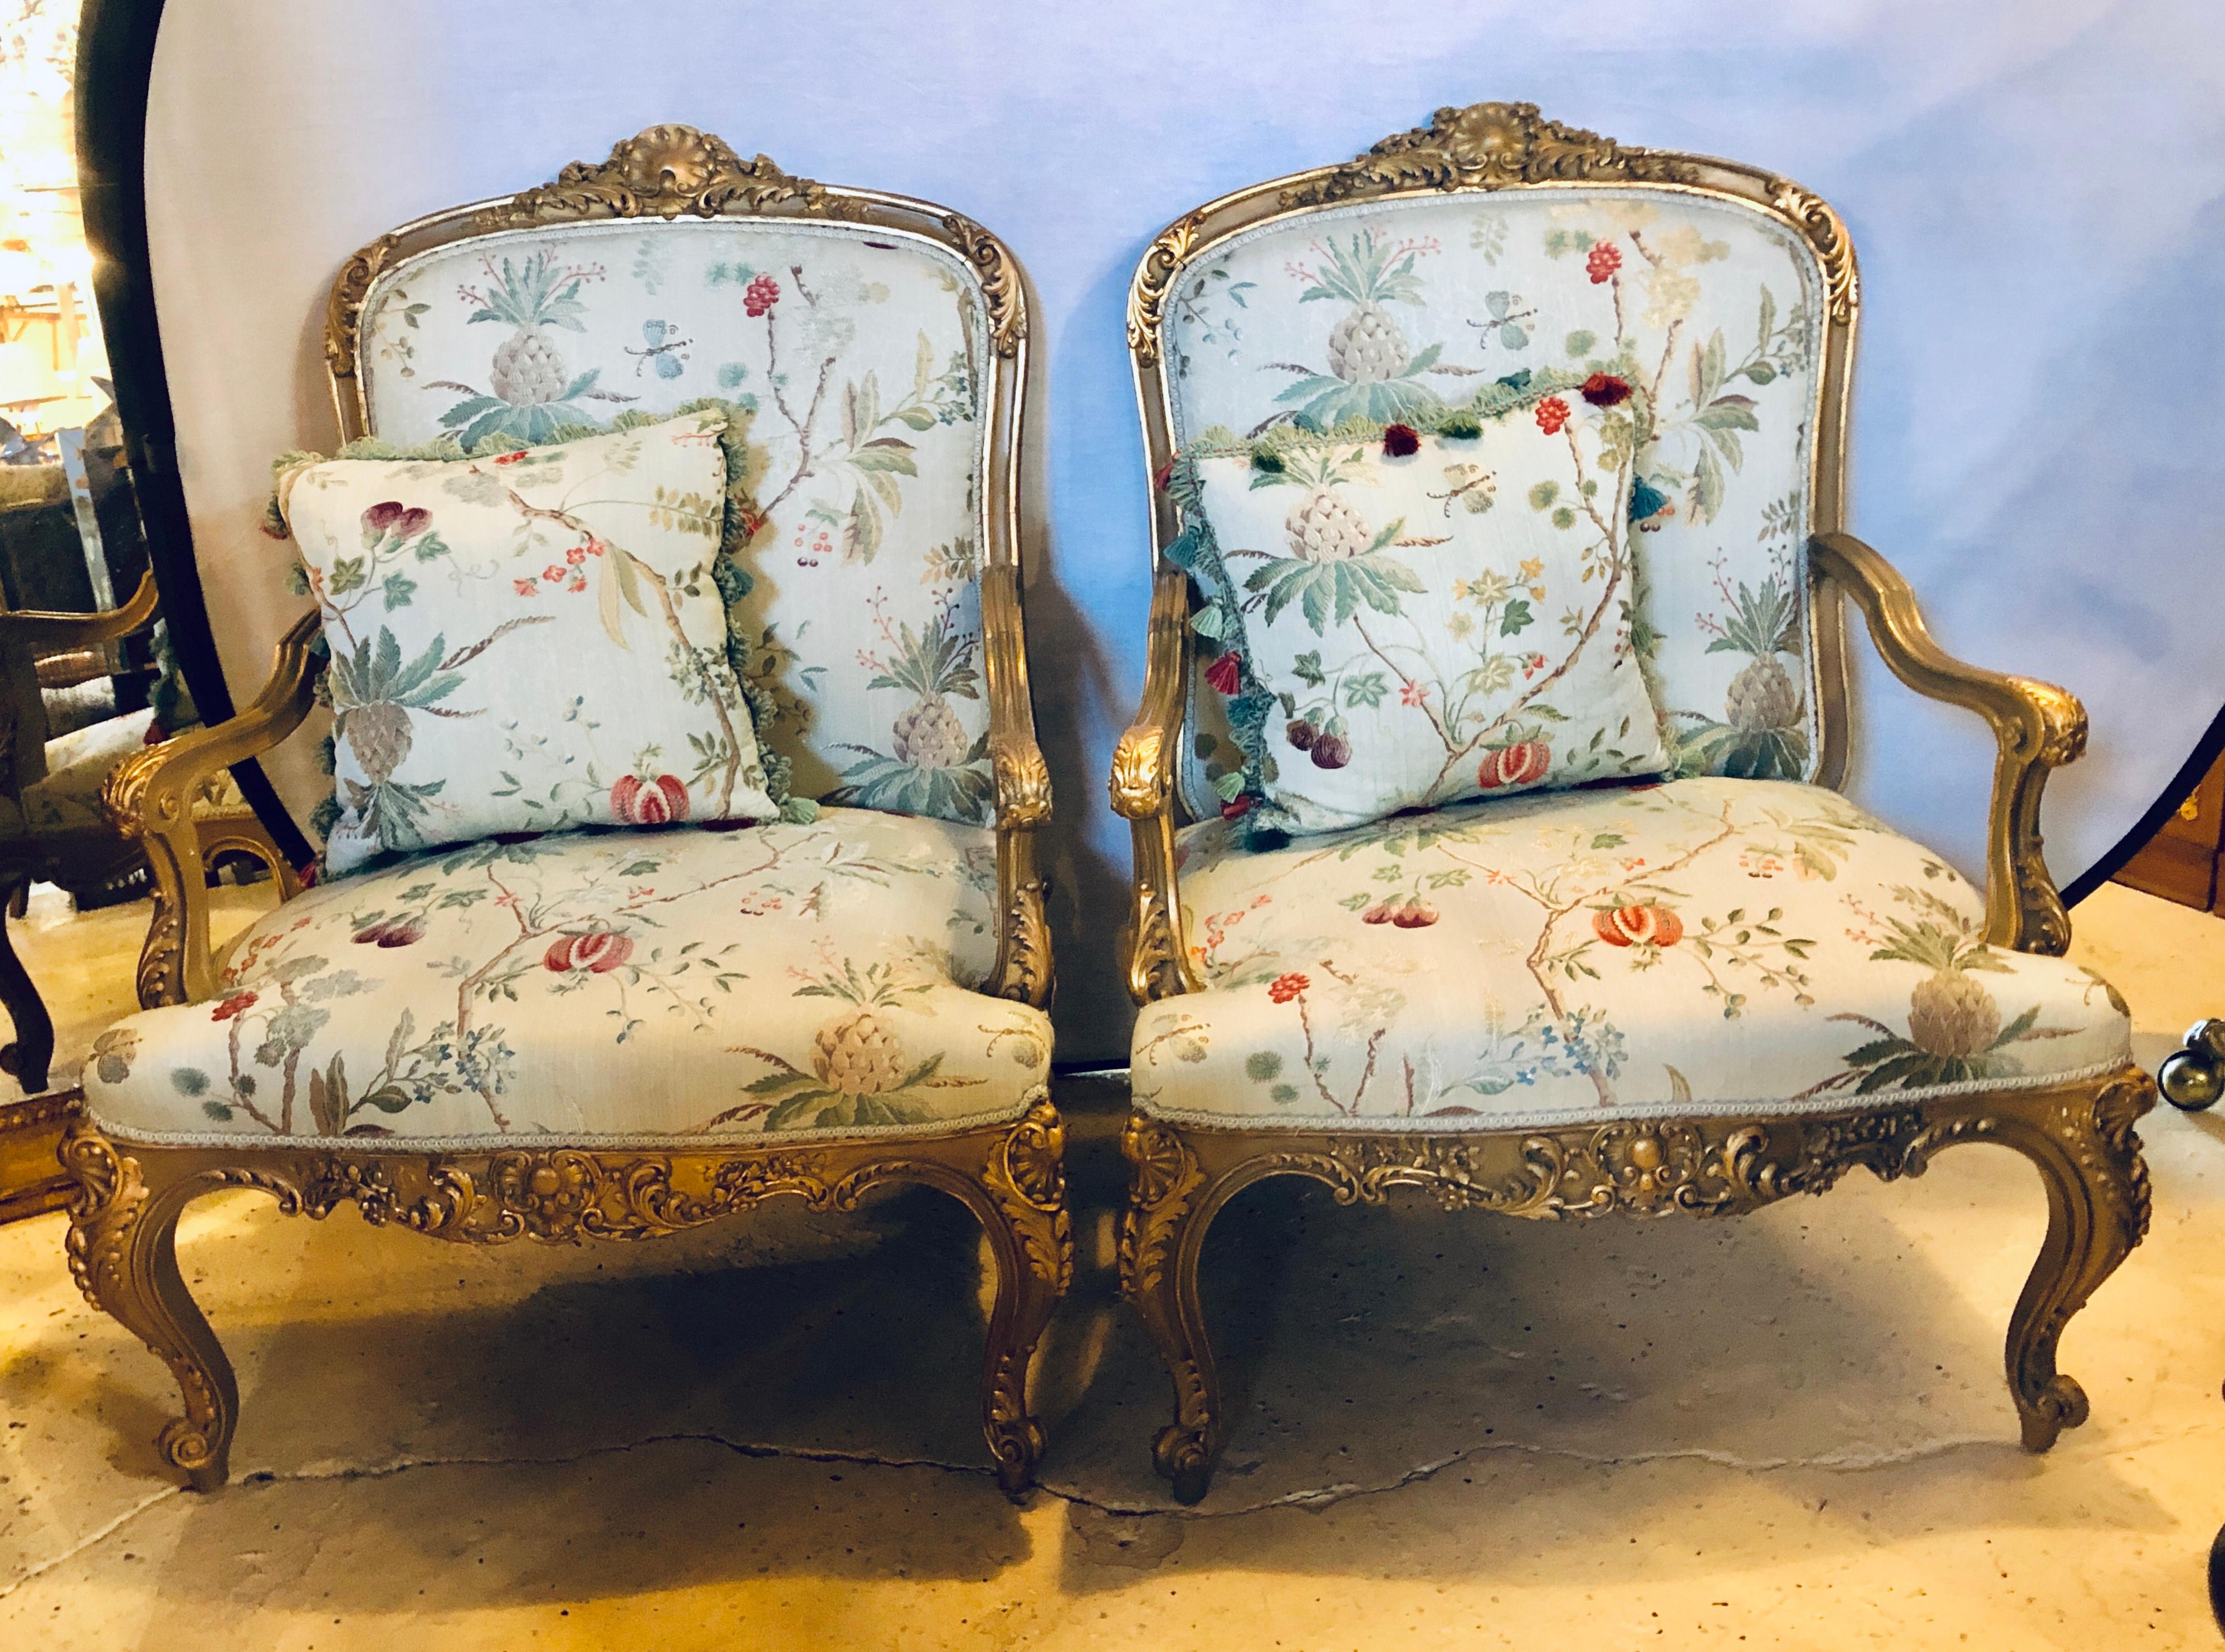 Pair of gilt wood Louis XV style overstuffed fauteuils in scalamandre fabric. In a word, spectacular. These wonderfully carved gilt wood frames in a light paint decorated background are finely carved and covered in a great Scalamandre fabric. Each